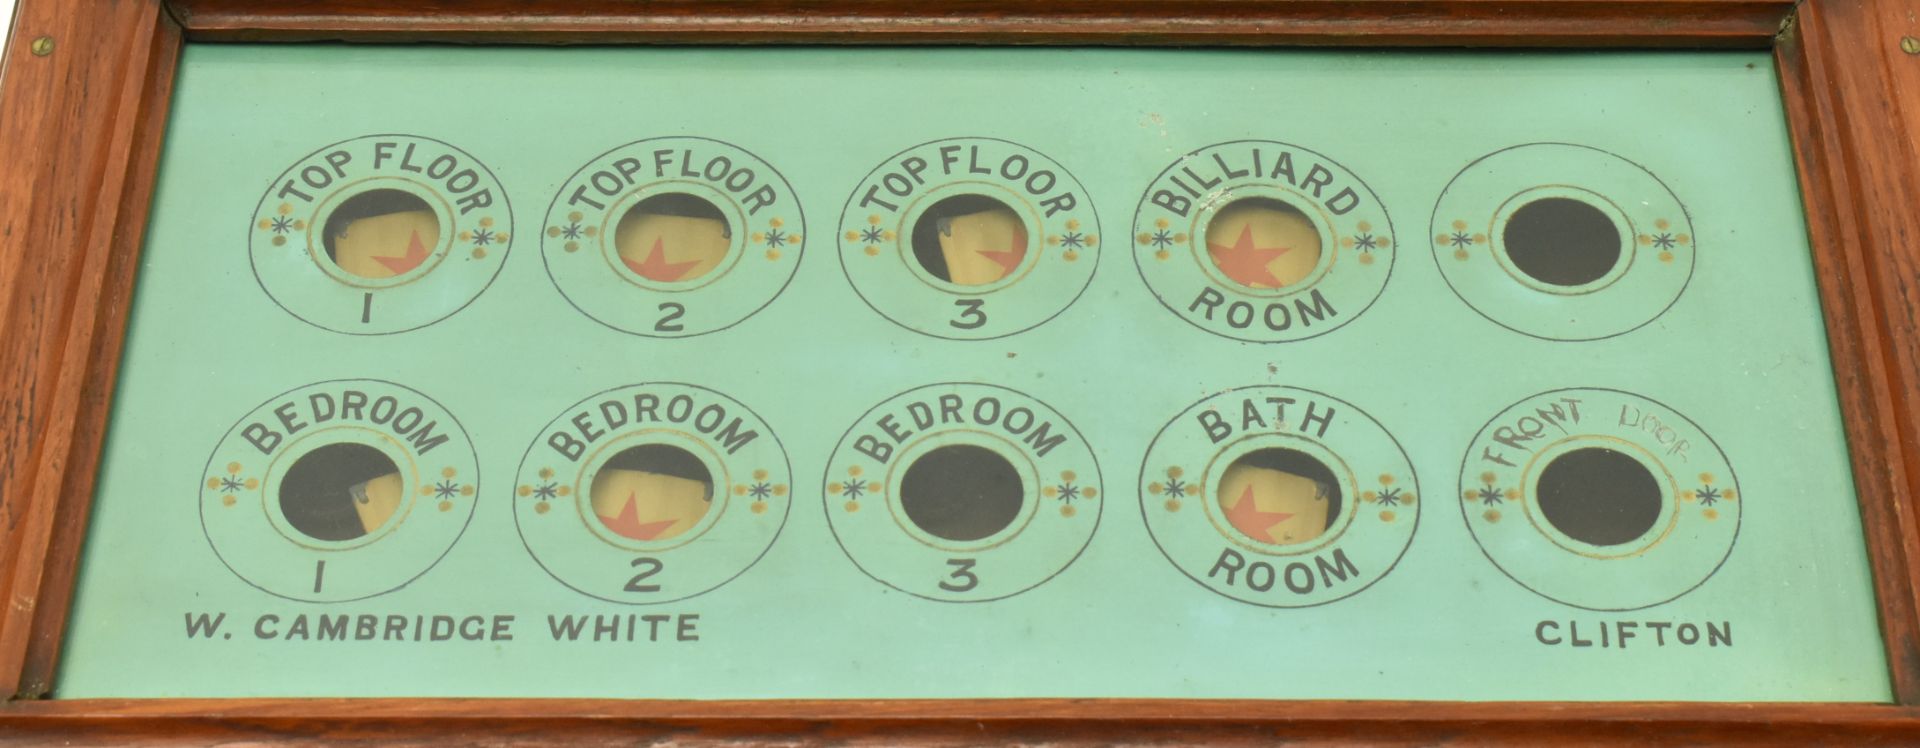 W. CAMBRIDGE WHITE OF CLIFTON - EDWARDIAN BELL INDICATOR BOARD - Image 2 of 8